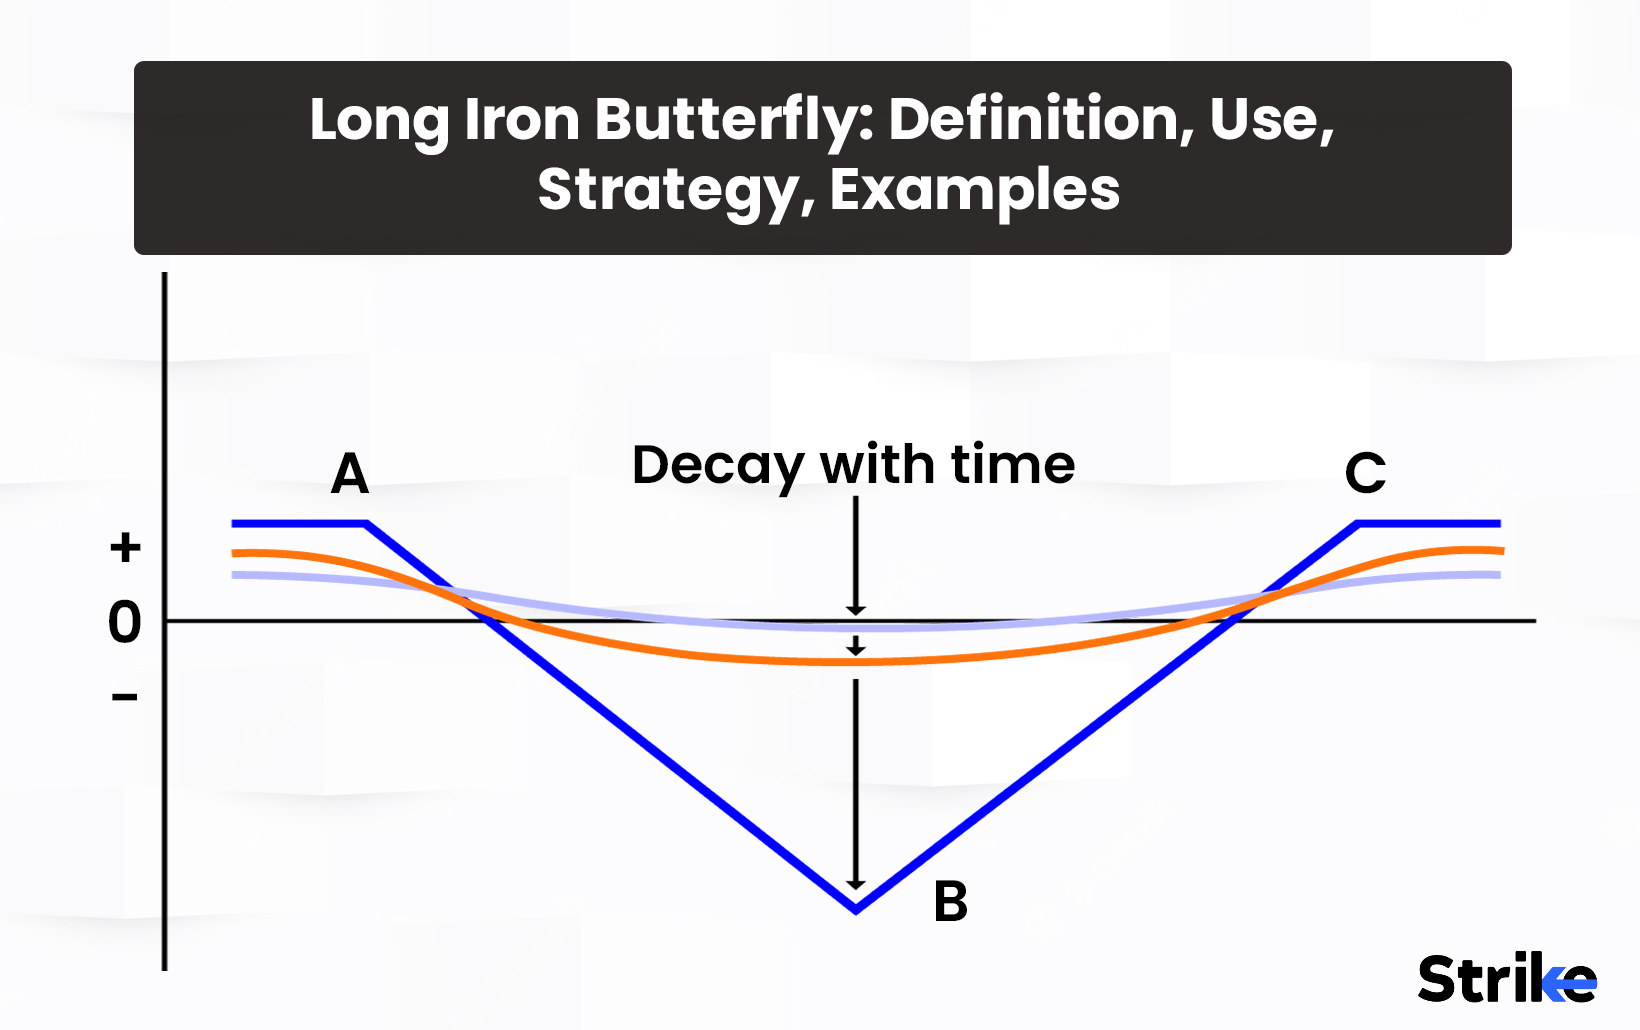 Long Iron Butterfly: Definition, Use, Strategy, Examples